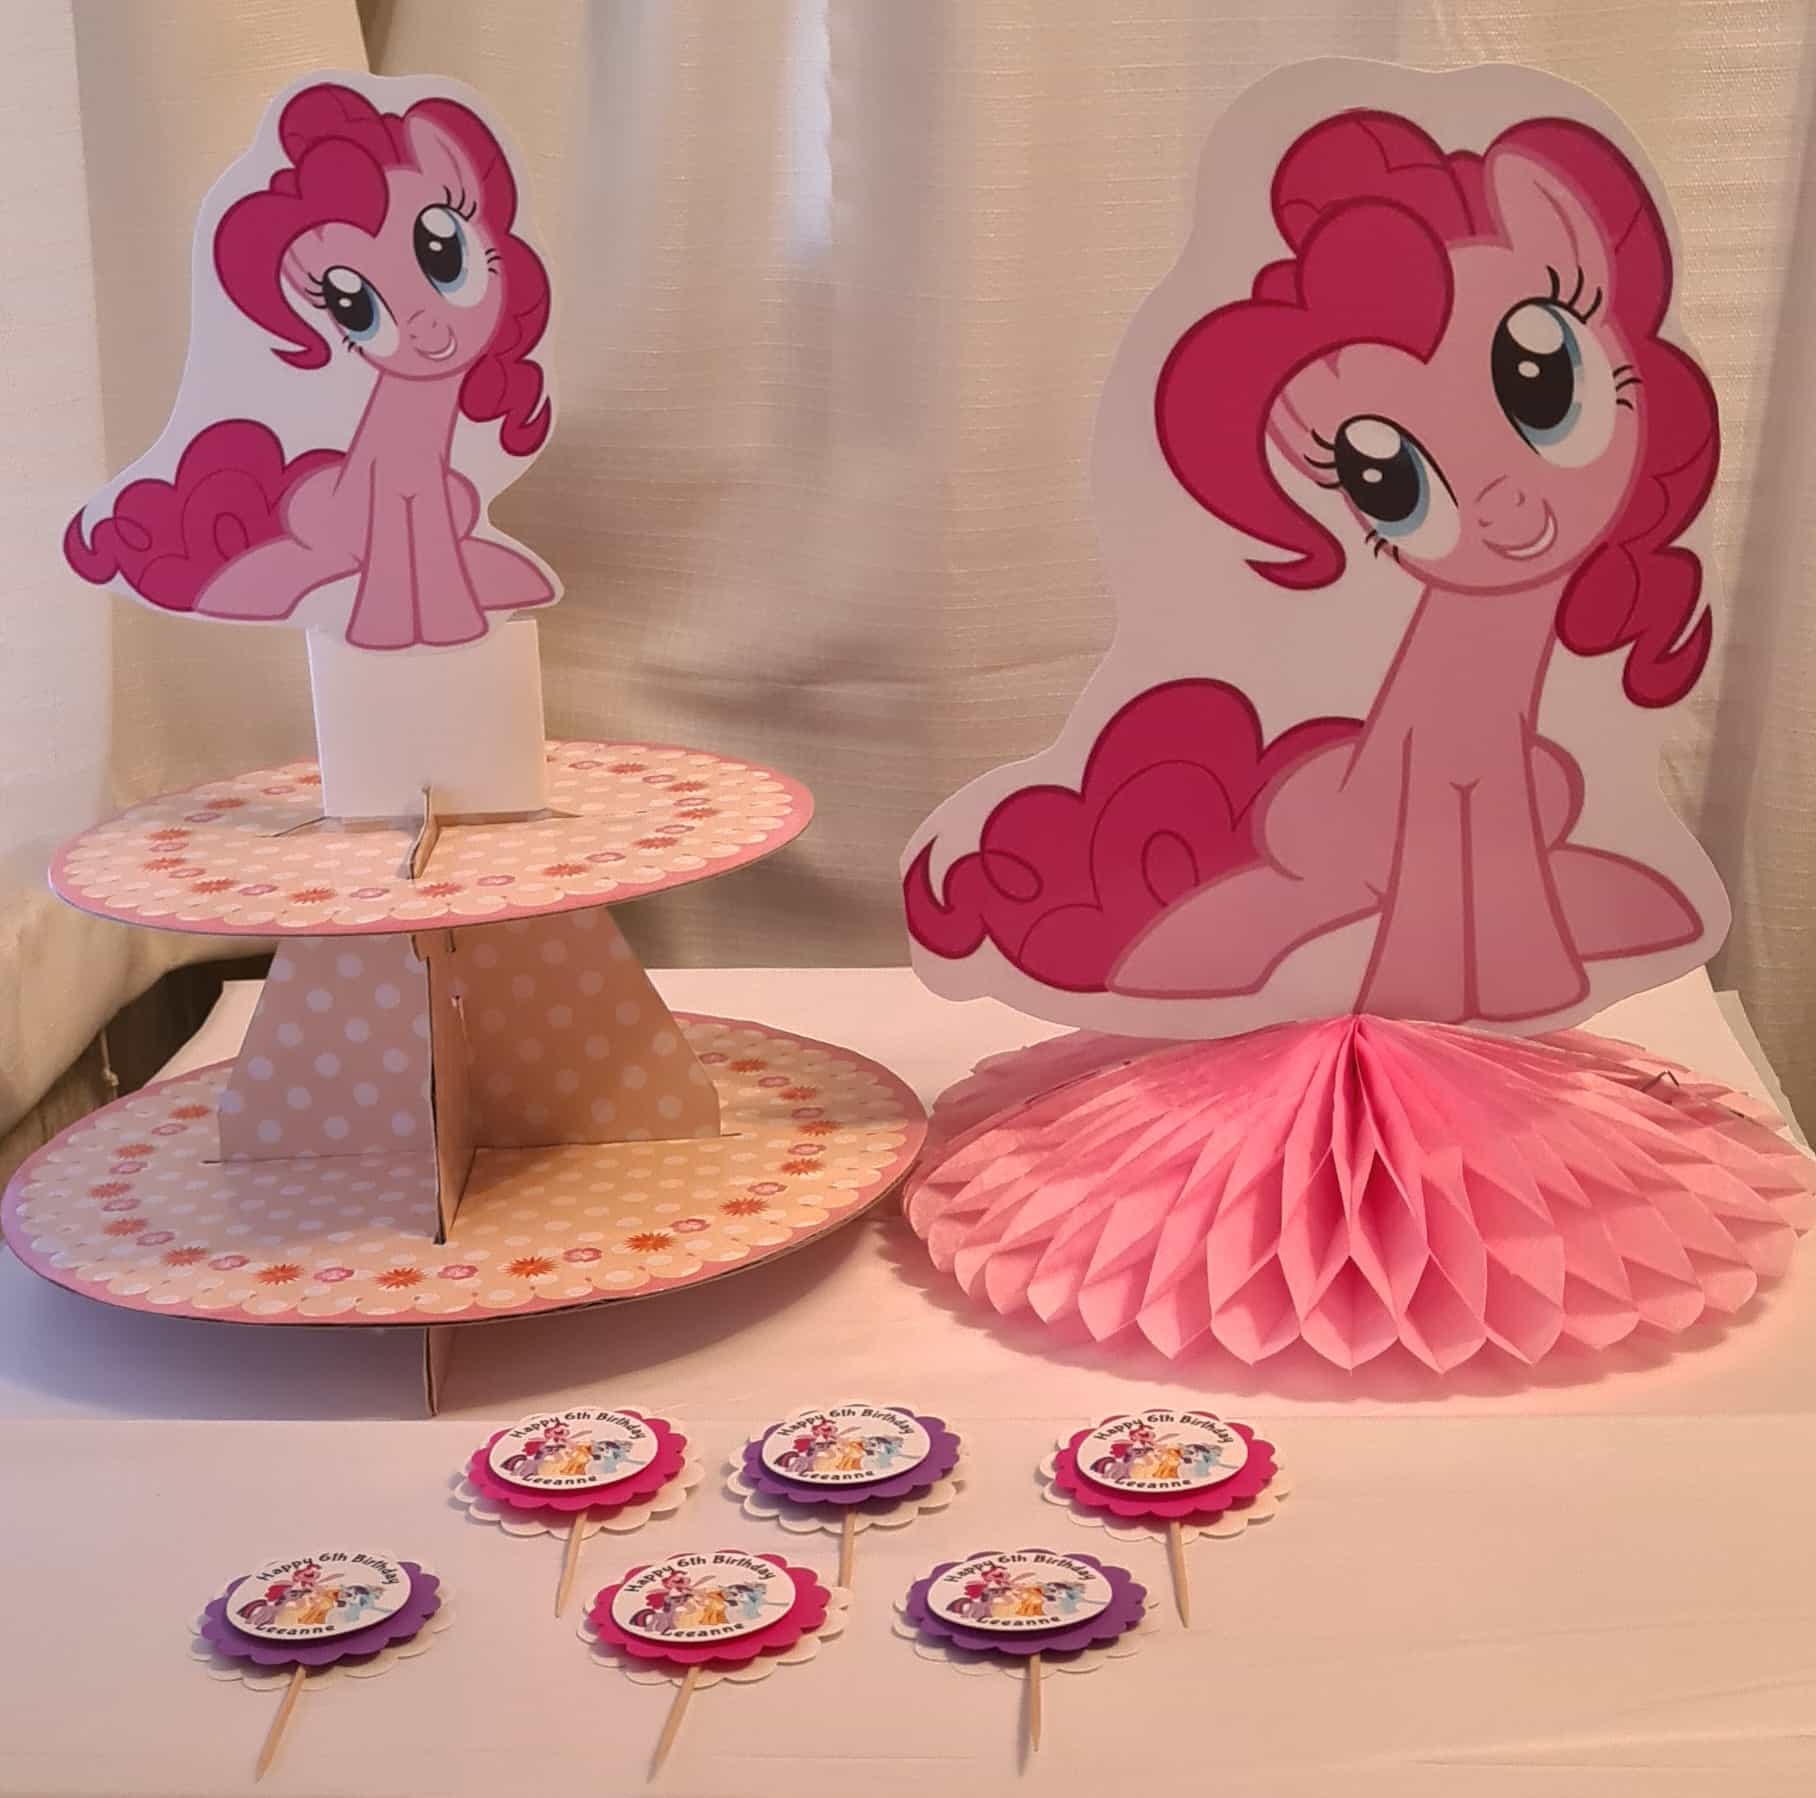 My Little Pony 3 pc. Birthday Party Set Centerpiece Personalized cupcake toppers